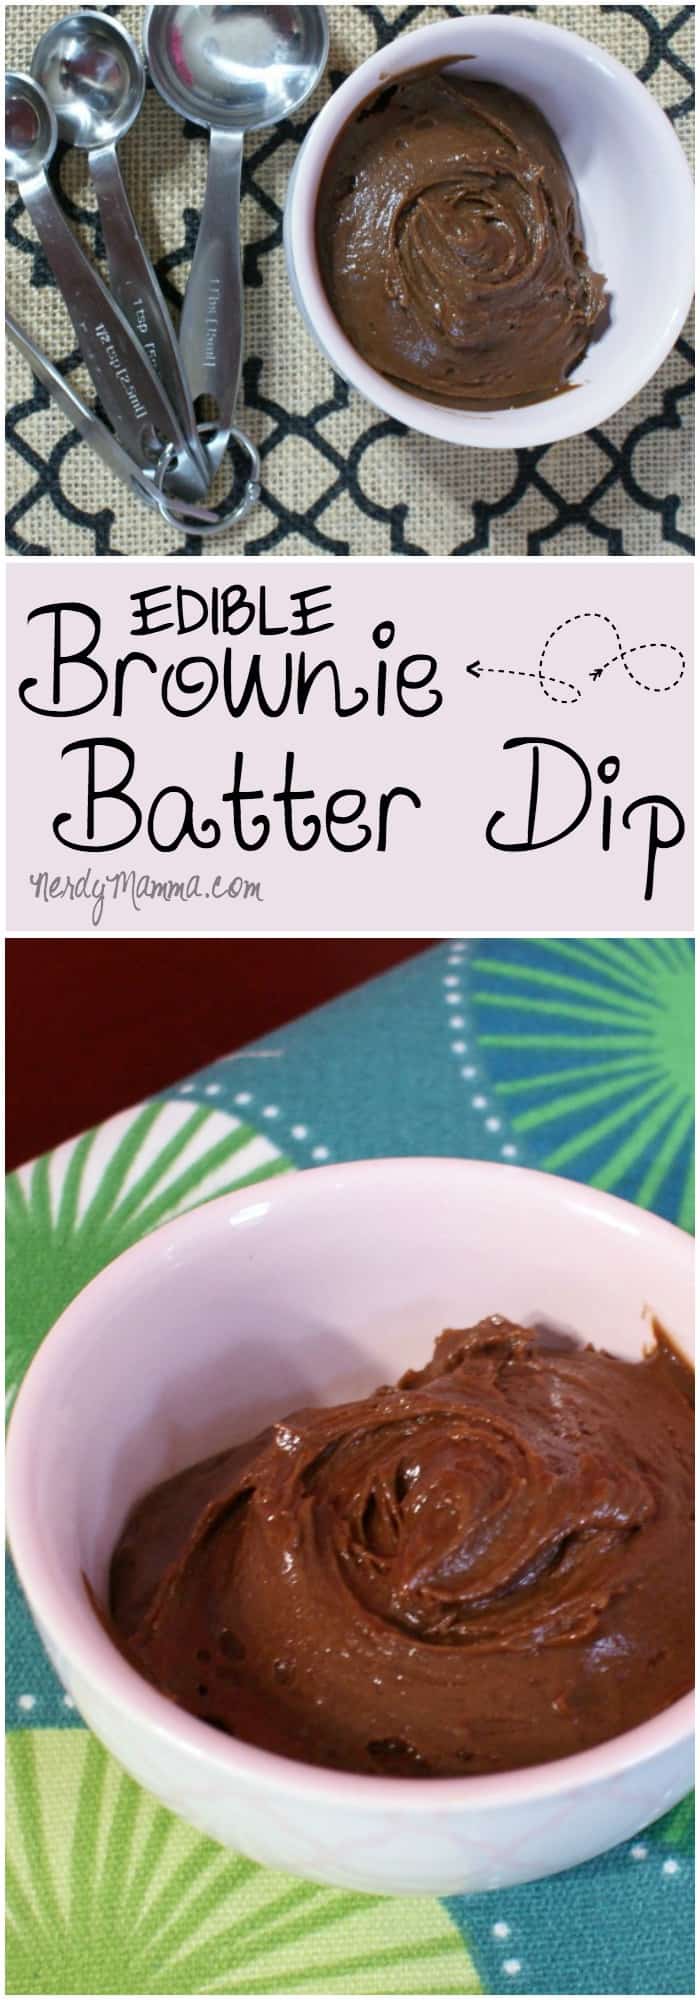 I've heard of edible cake batter, but this recipe for edible brownie batter is amazing. Gluten-free, eggless, dairy-free...it hits all the good places!